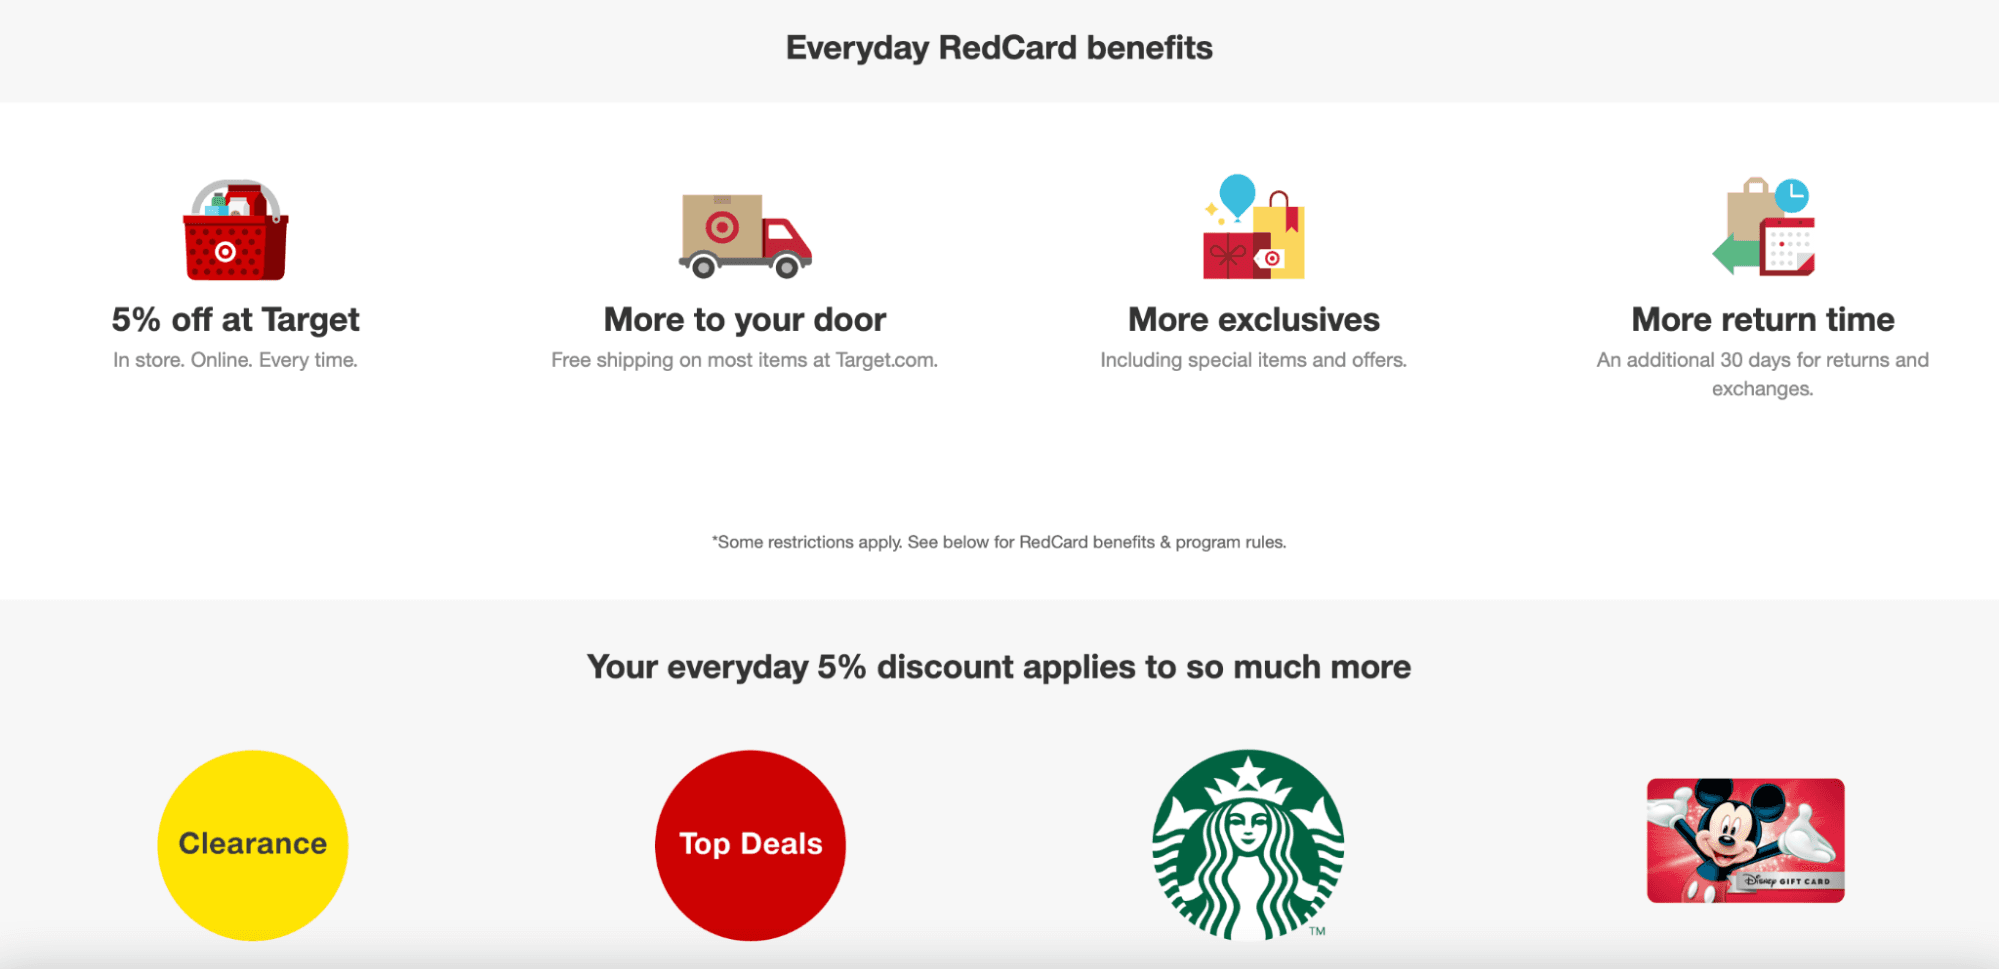 A screenshot from the Target website, promoting everyday RedCard benefits for customers.